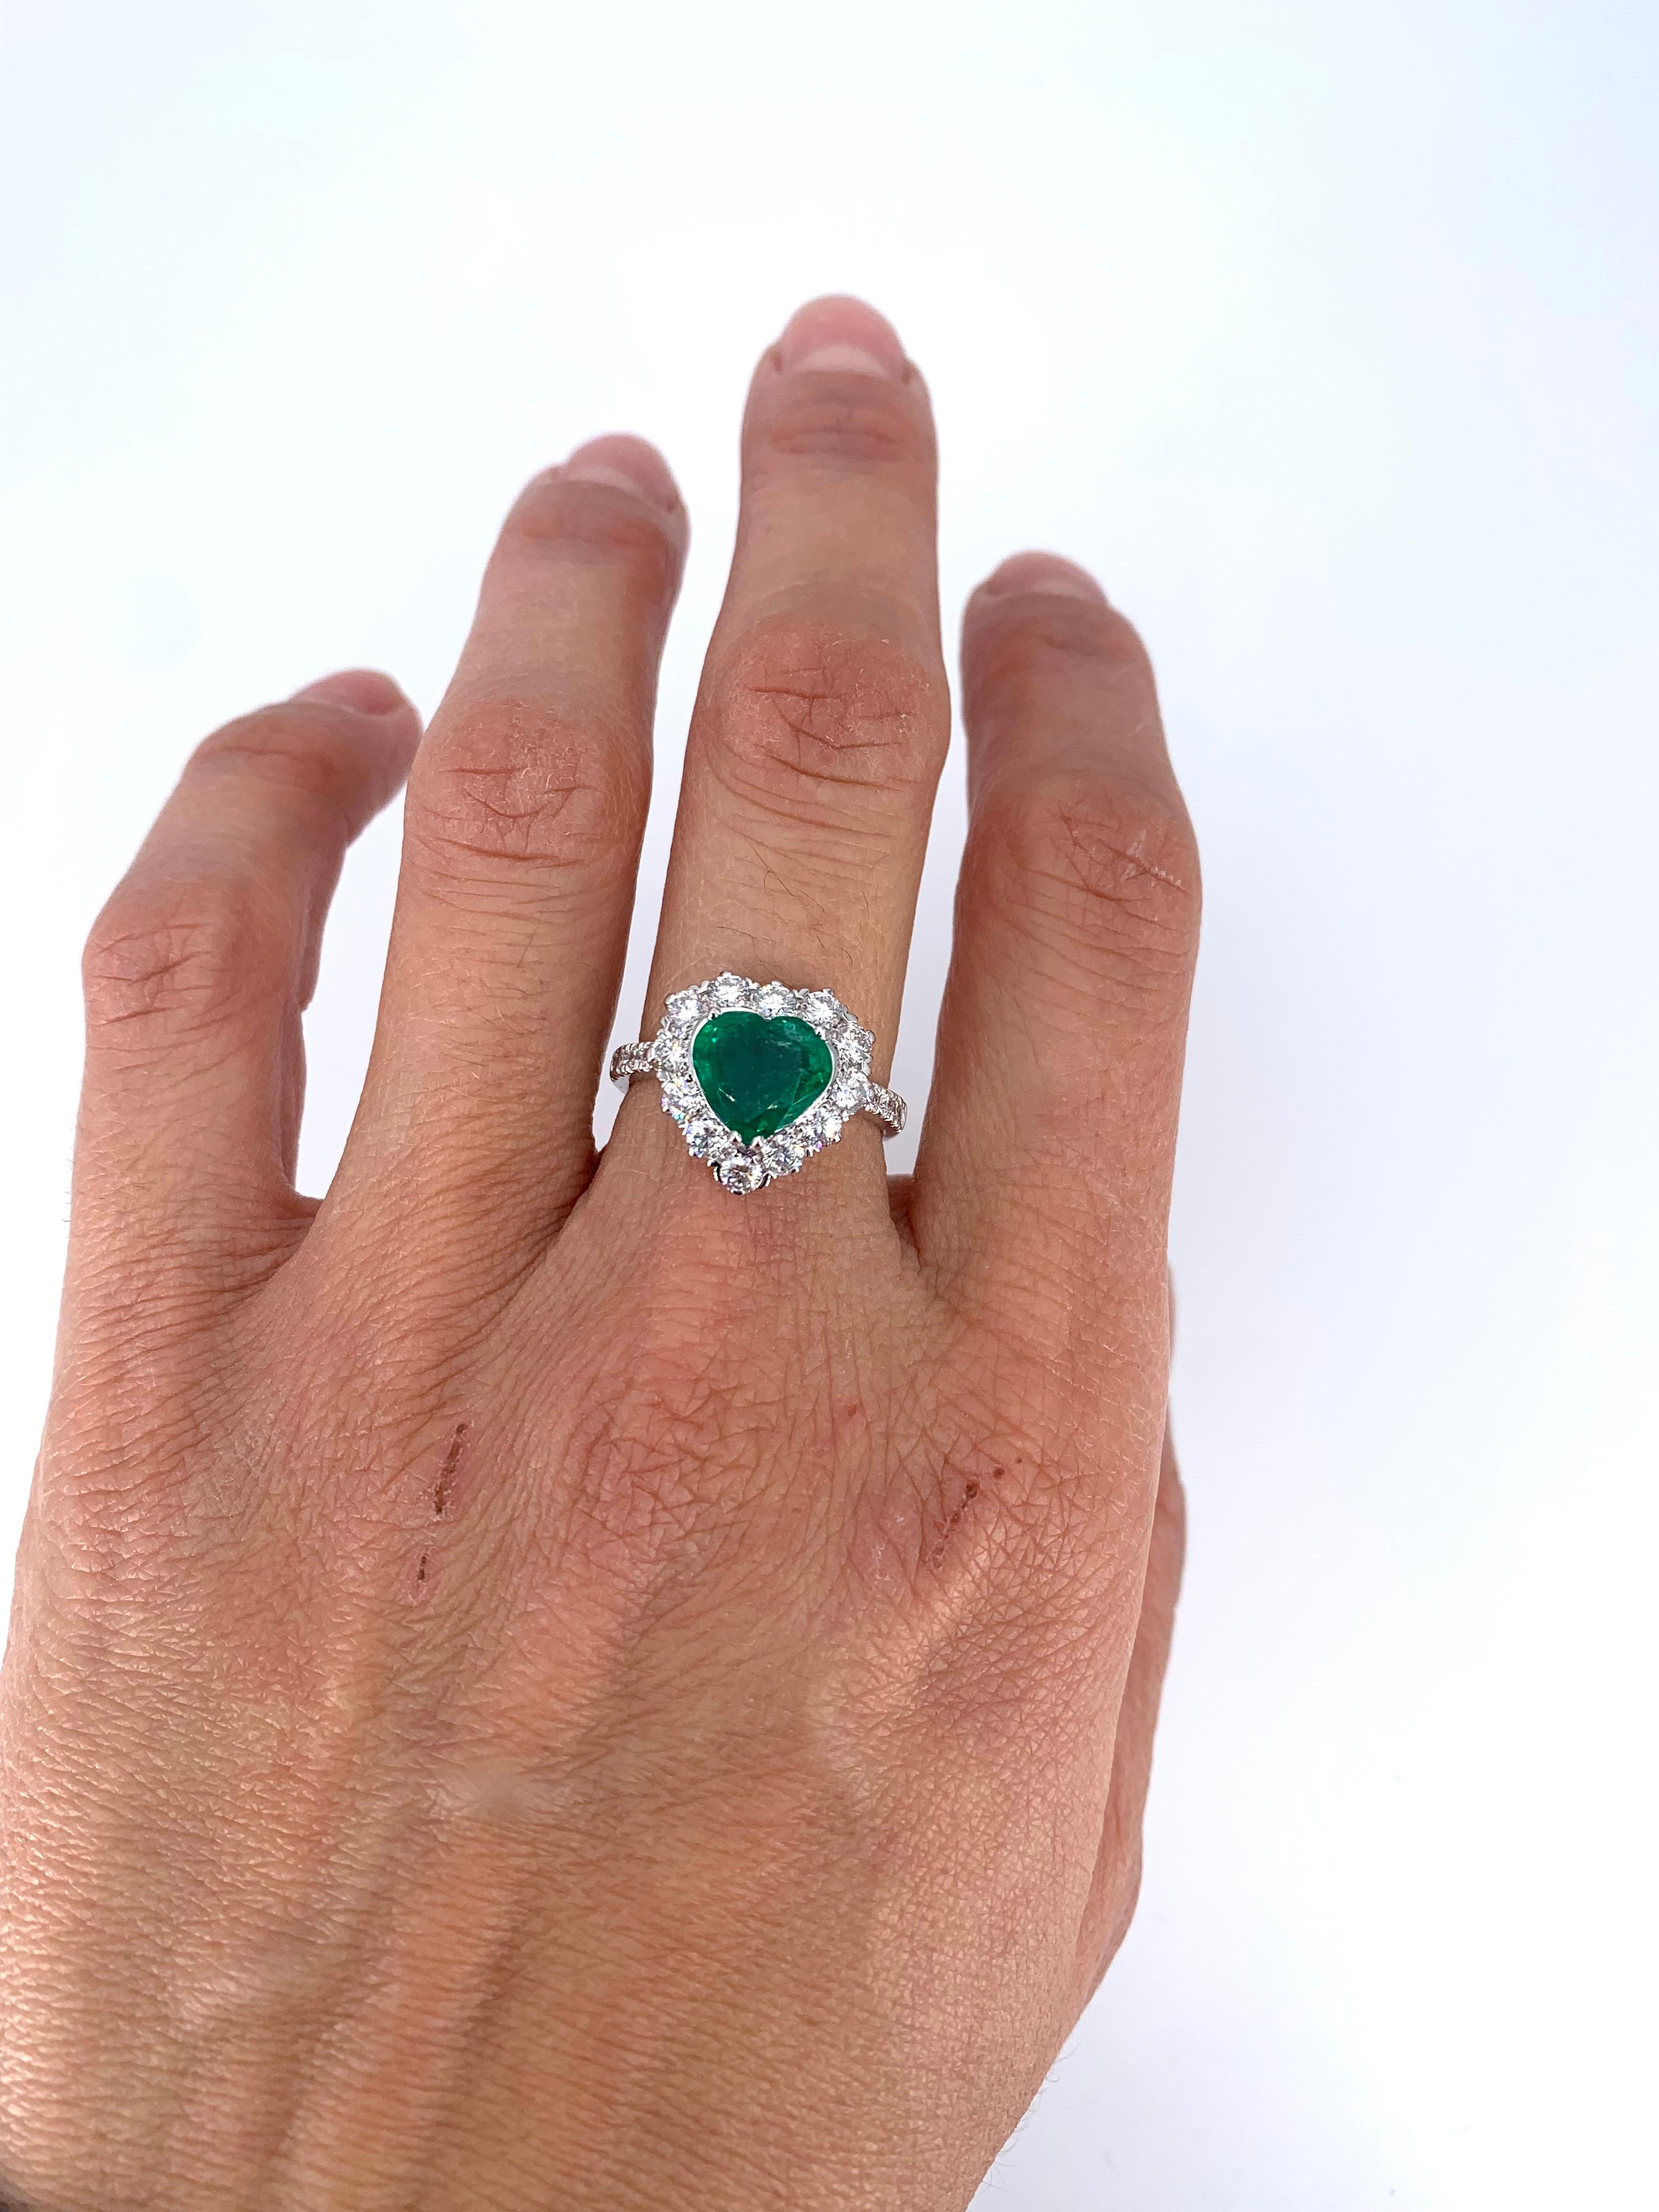 Contemporary 7.32 Carat Emerald & 3.75 Carat Diamond Heart Shaped Ring For Sale 3